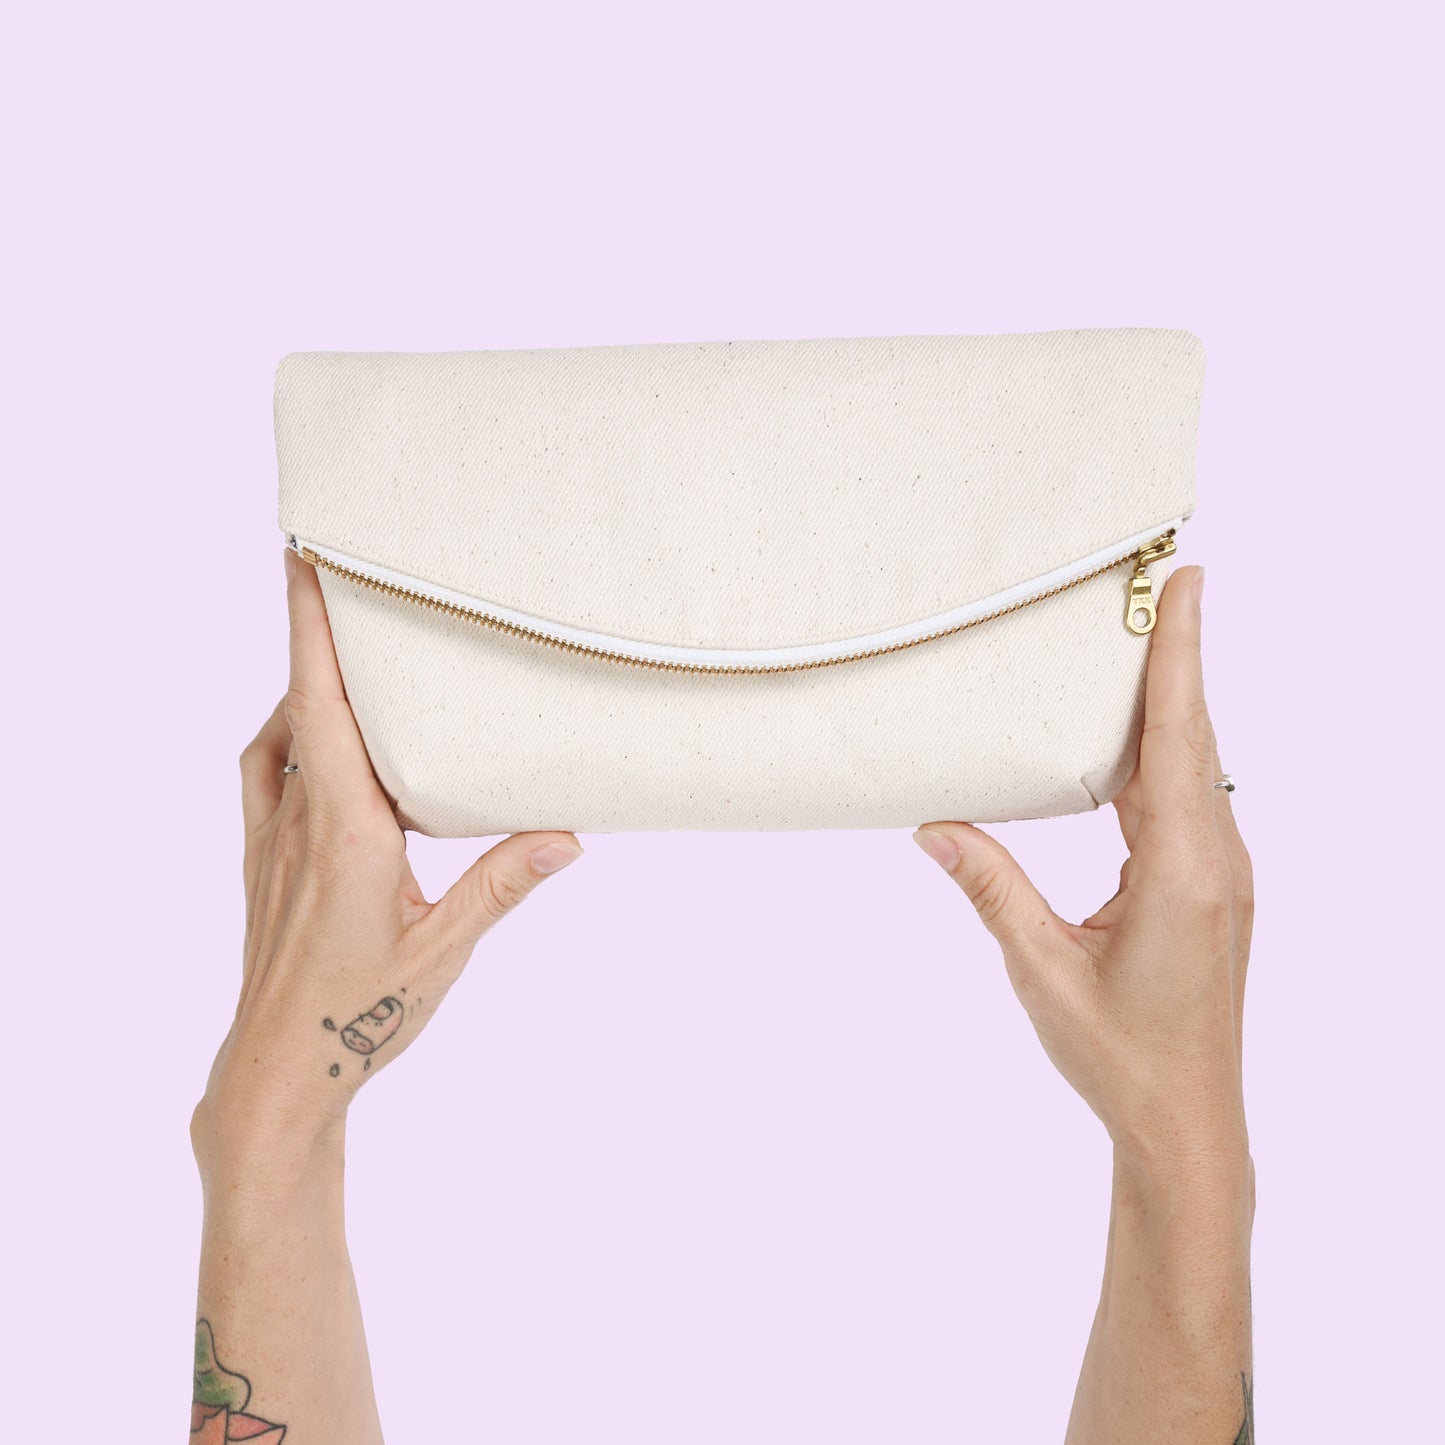 Arch Clutch - Paper Sewing Pattern - Kylie And The Machine